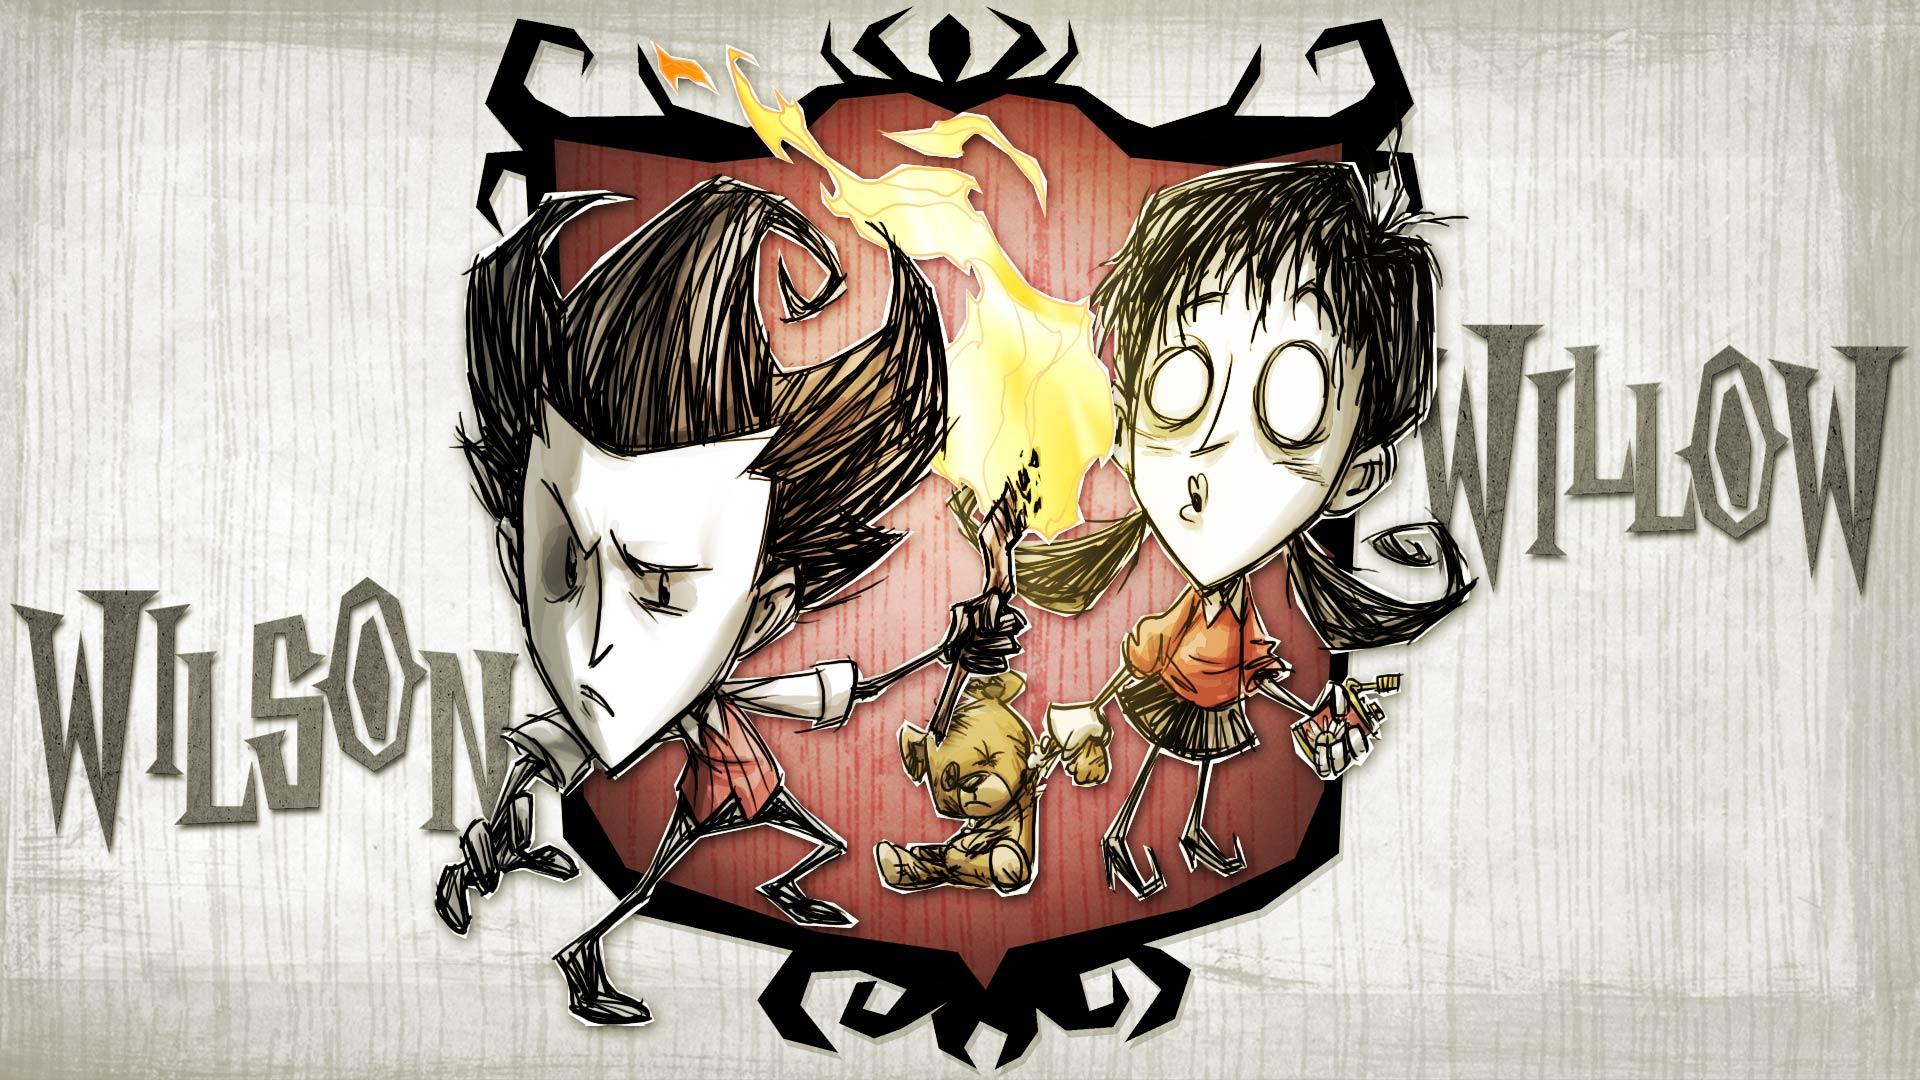 Don't Starve Together and Theorems. Steam Trading Cards